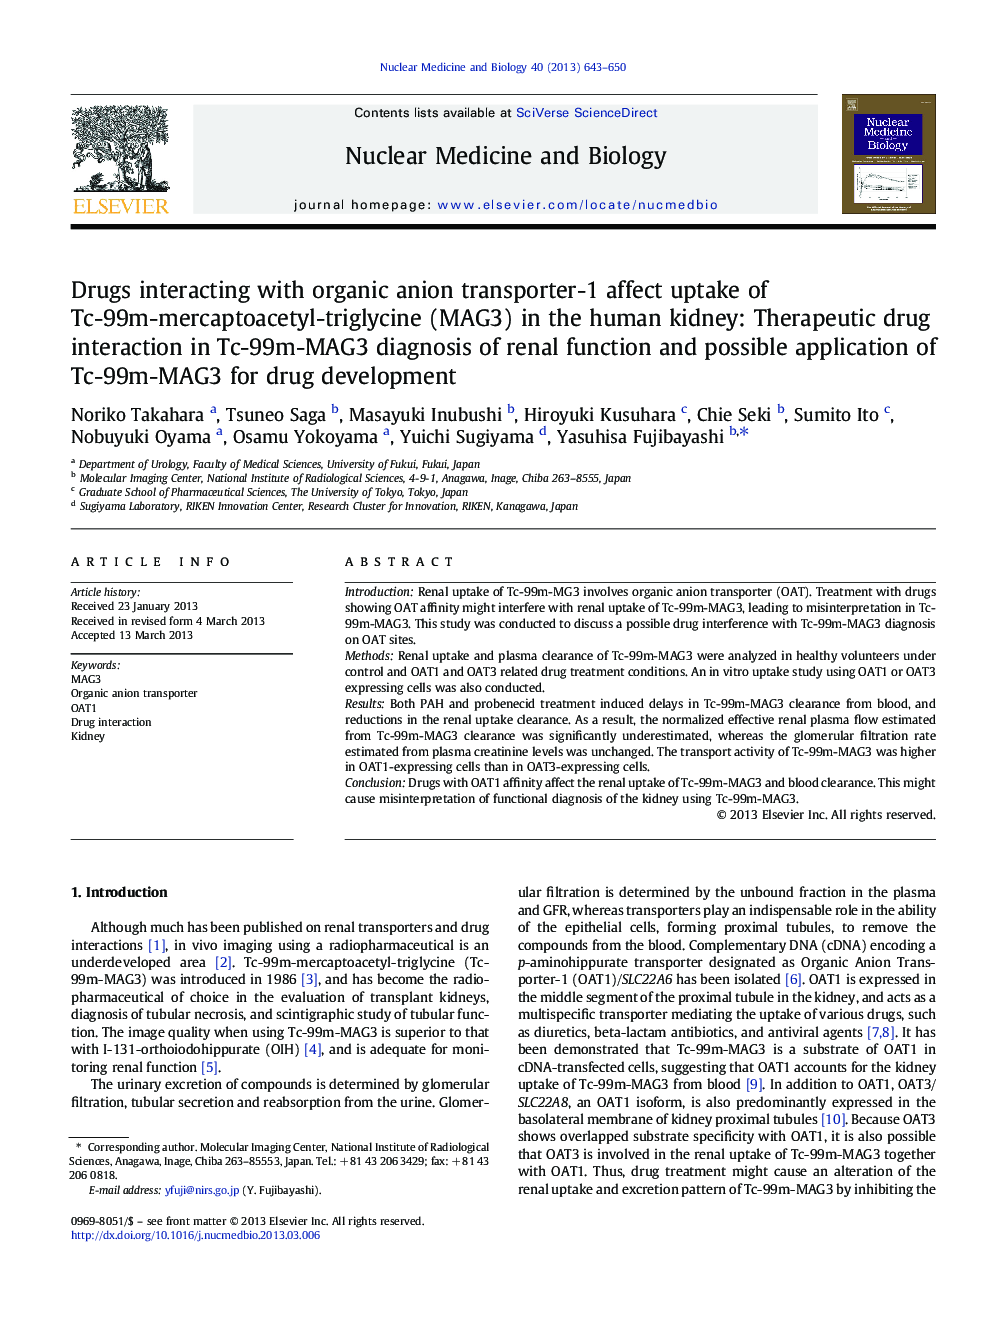 Drugs interacting with organic anion transporter-1 affect uptake of Tc-99m-mercaptoacetyl-triglycine (MAG3) in the human kidney: Therapeutic drug interaction in Tc-99m-MAG3 diagnosis of renal function and possible application of Tc-99m-MAG3 for drug devel